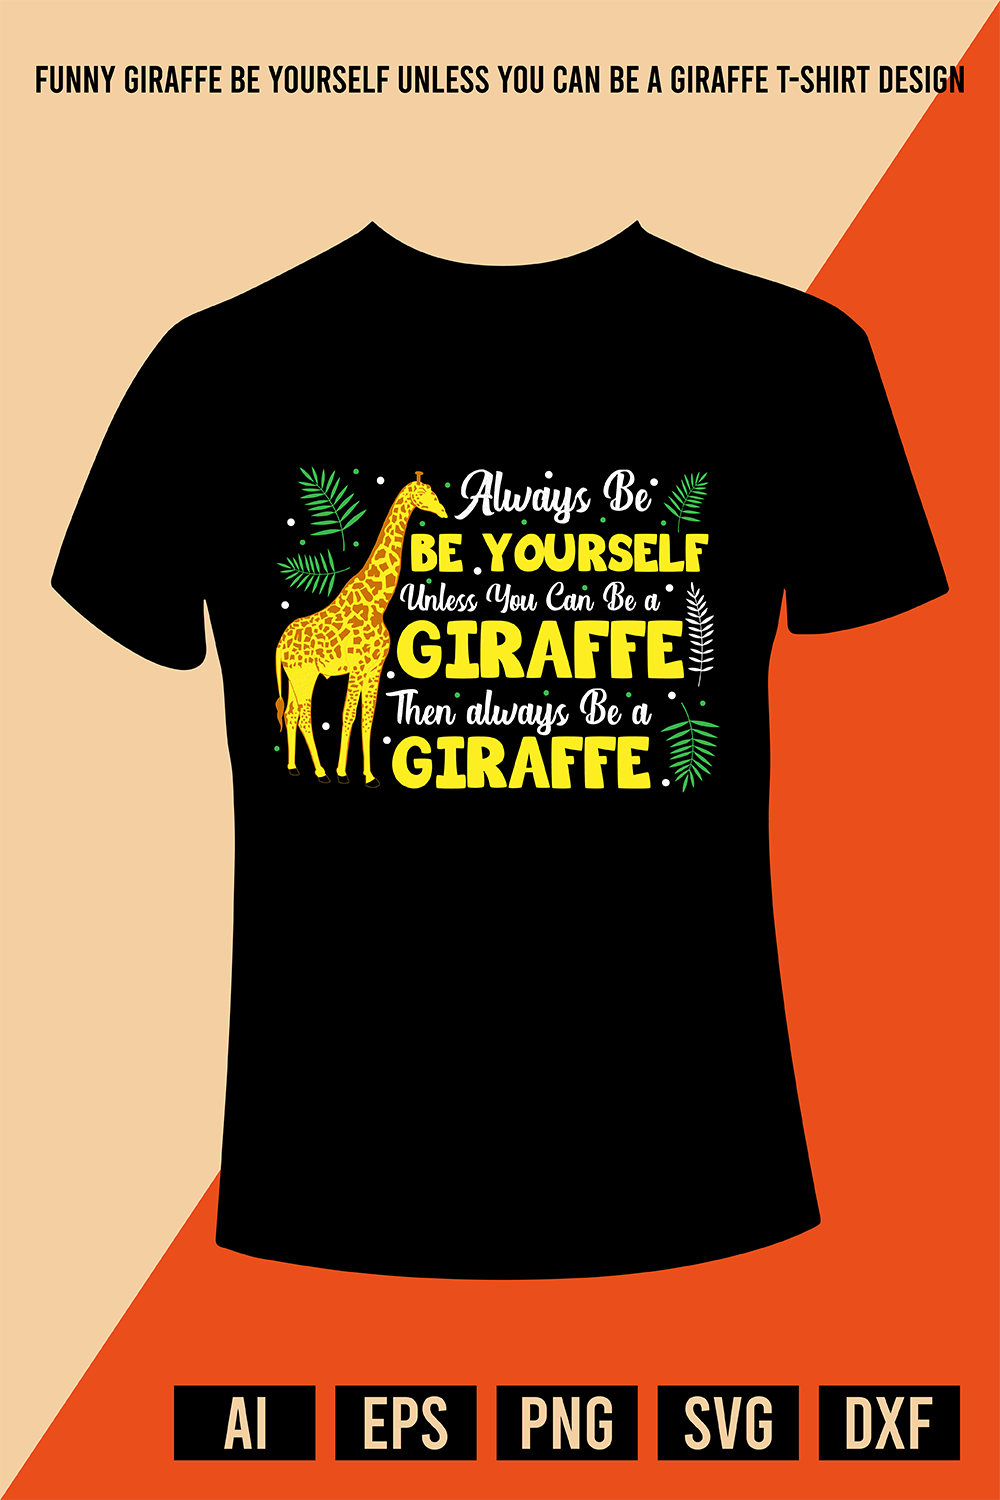 Funny Giraffe Be Yourself Unless You Can Be a Giraffe T-Shirt Design pinterest preview image.